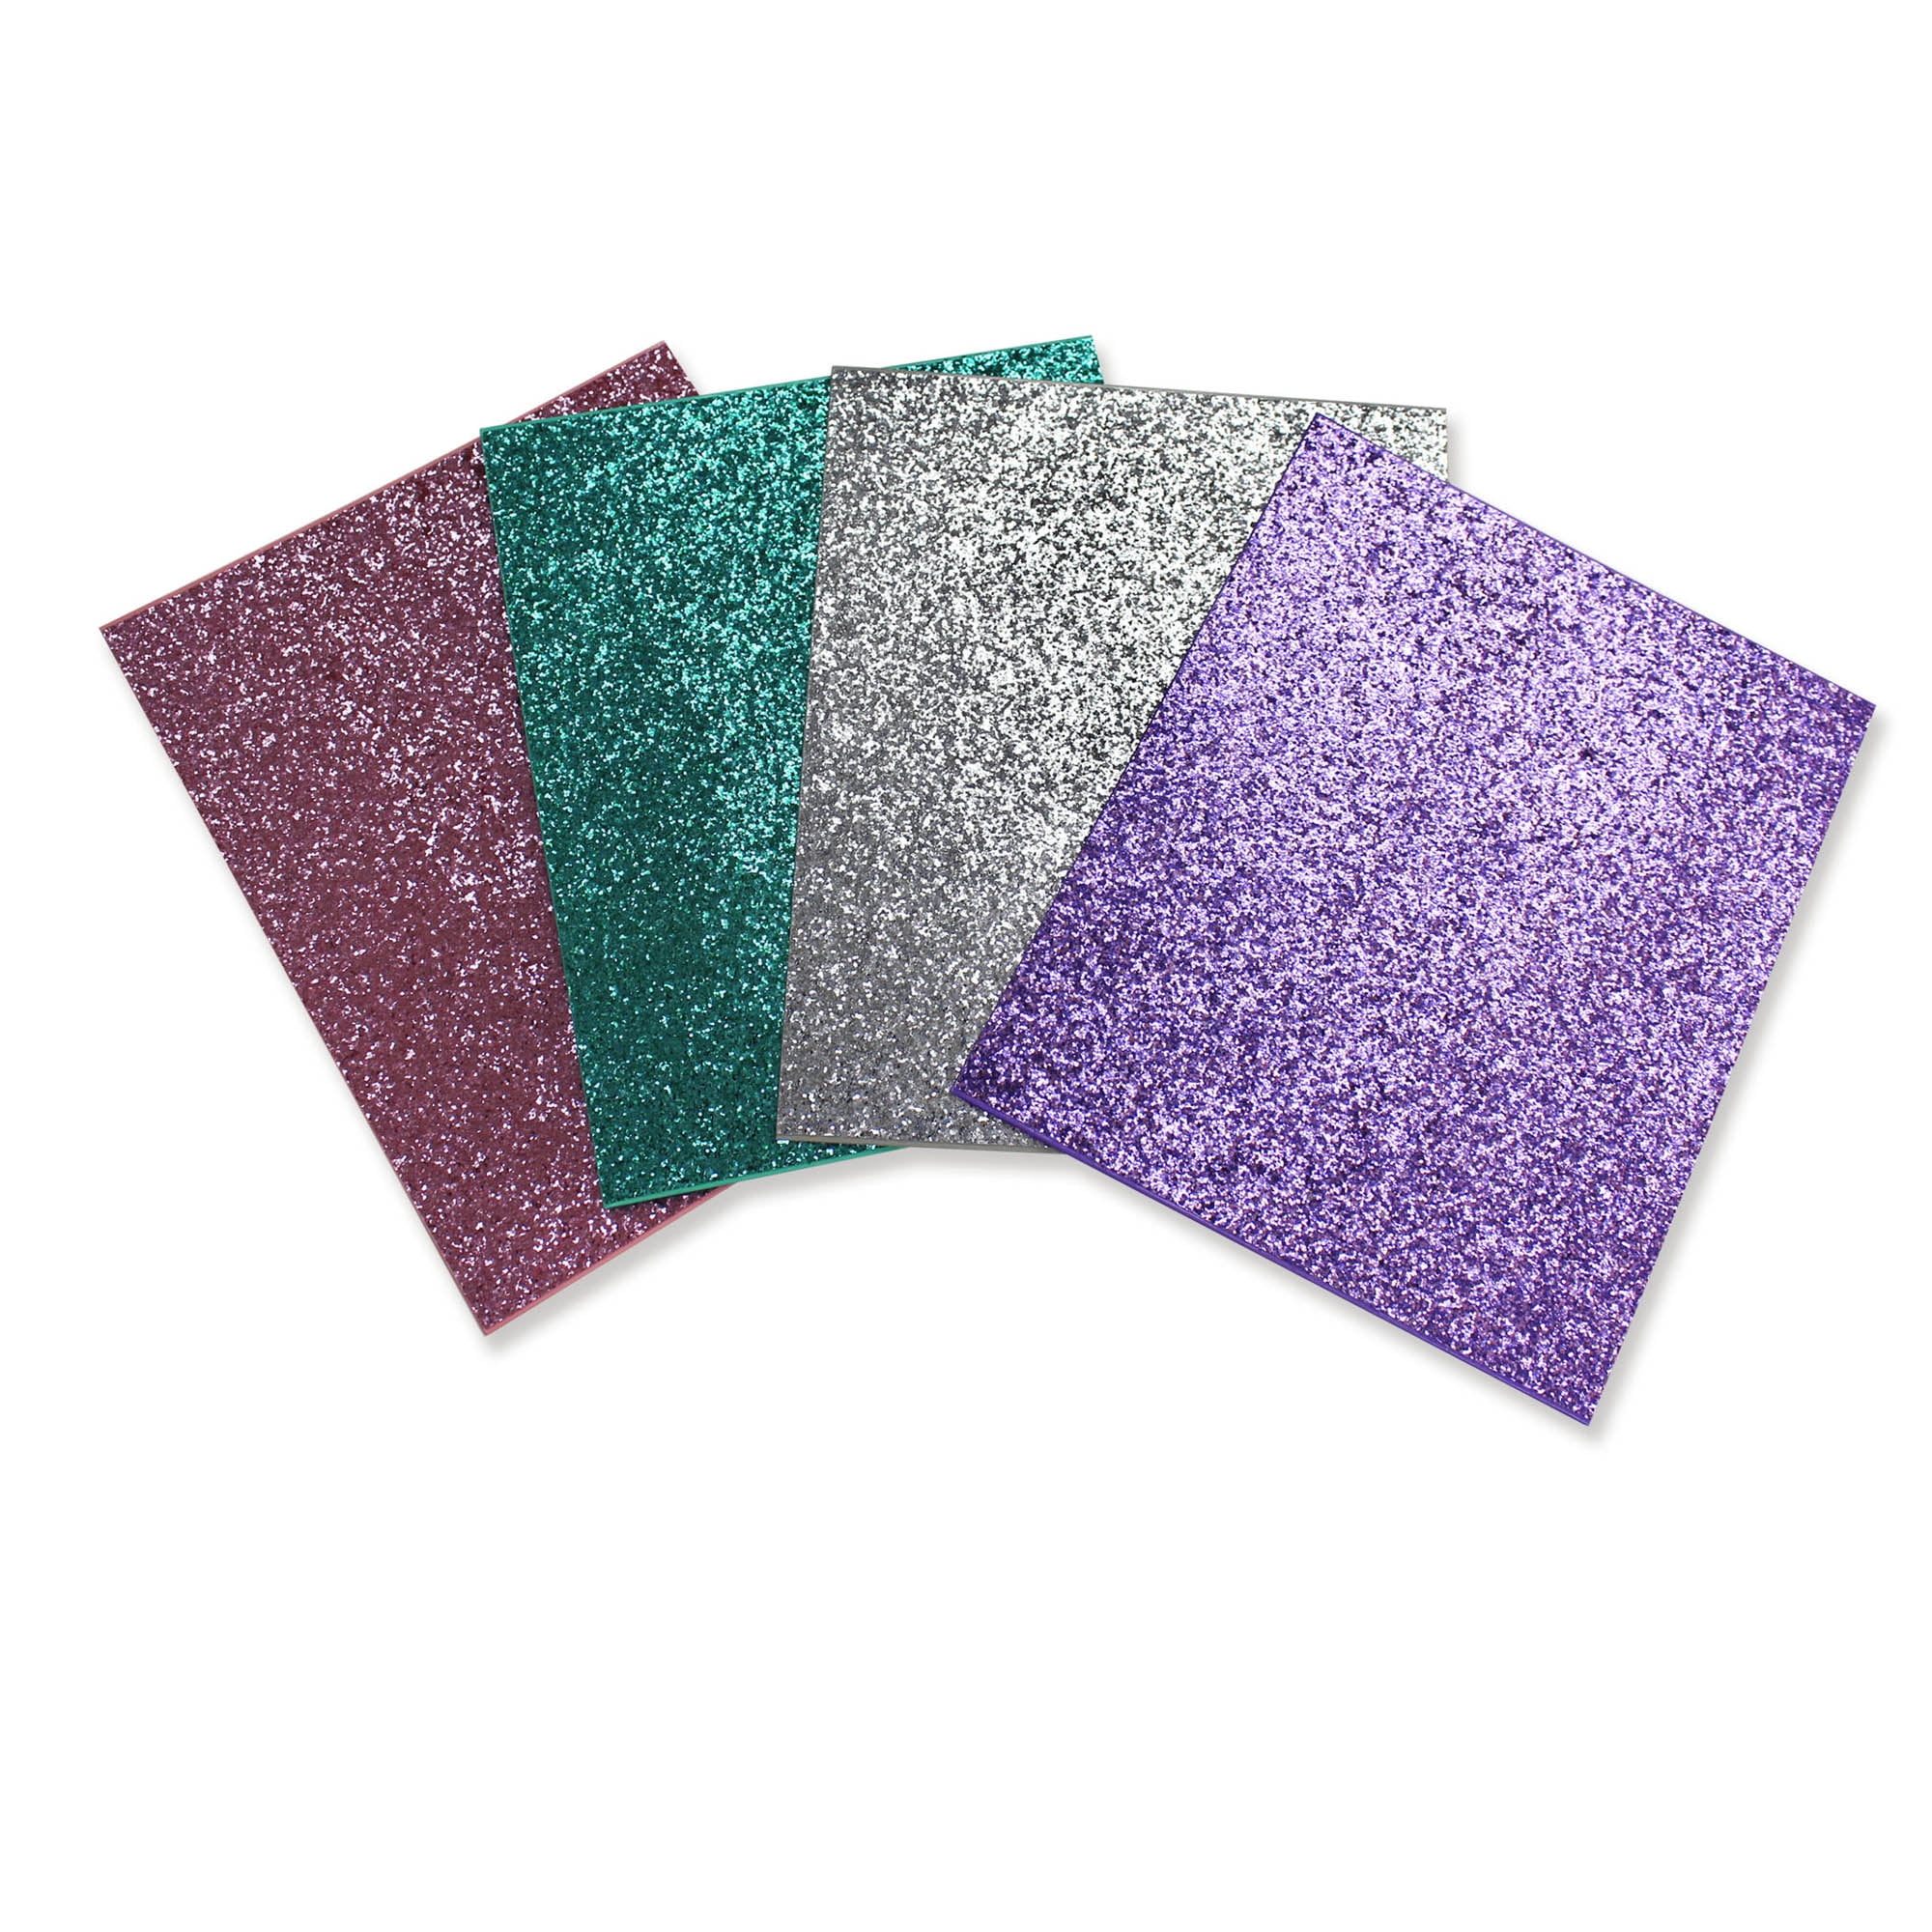 U Style Bedazzled Paper Two Pocket Folder, Color Choice Will Vary, 7617